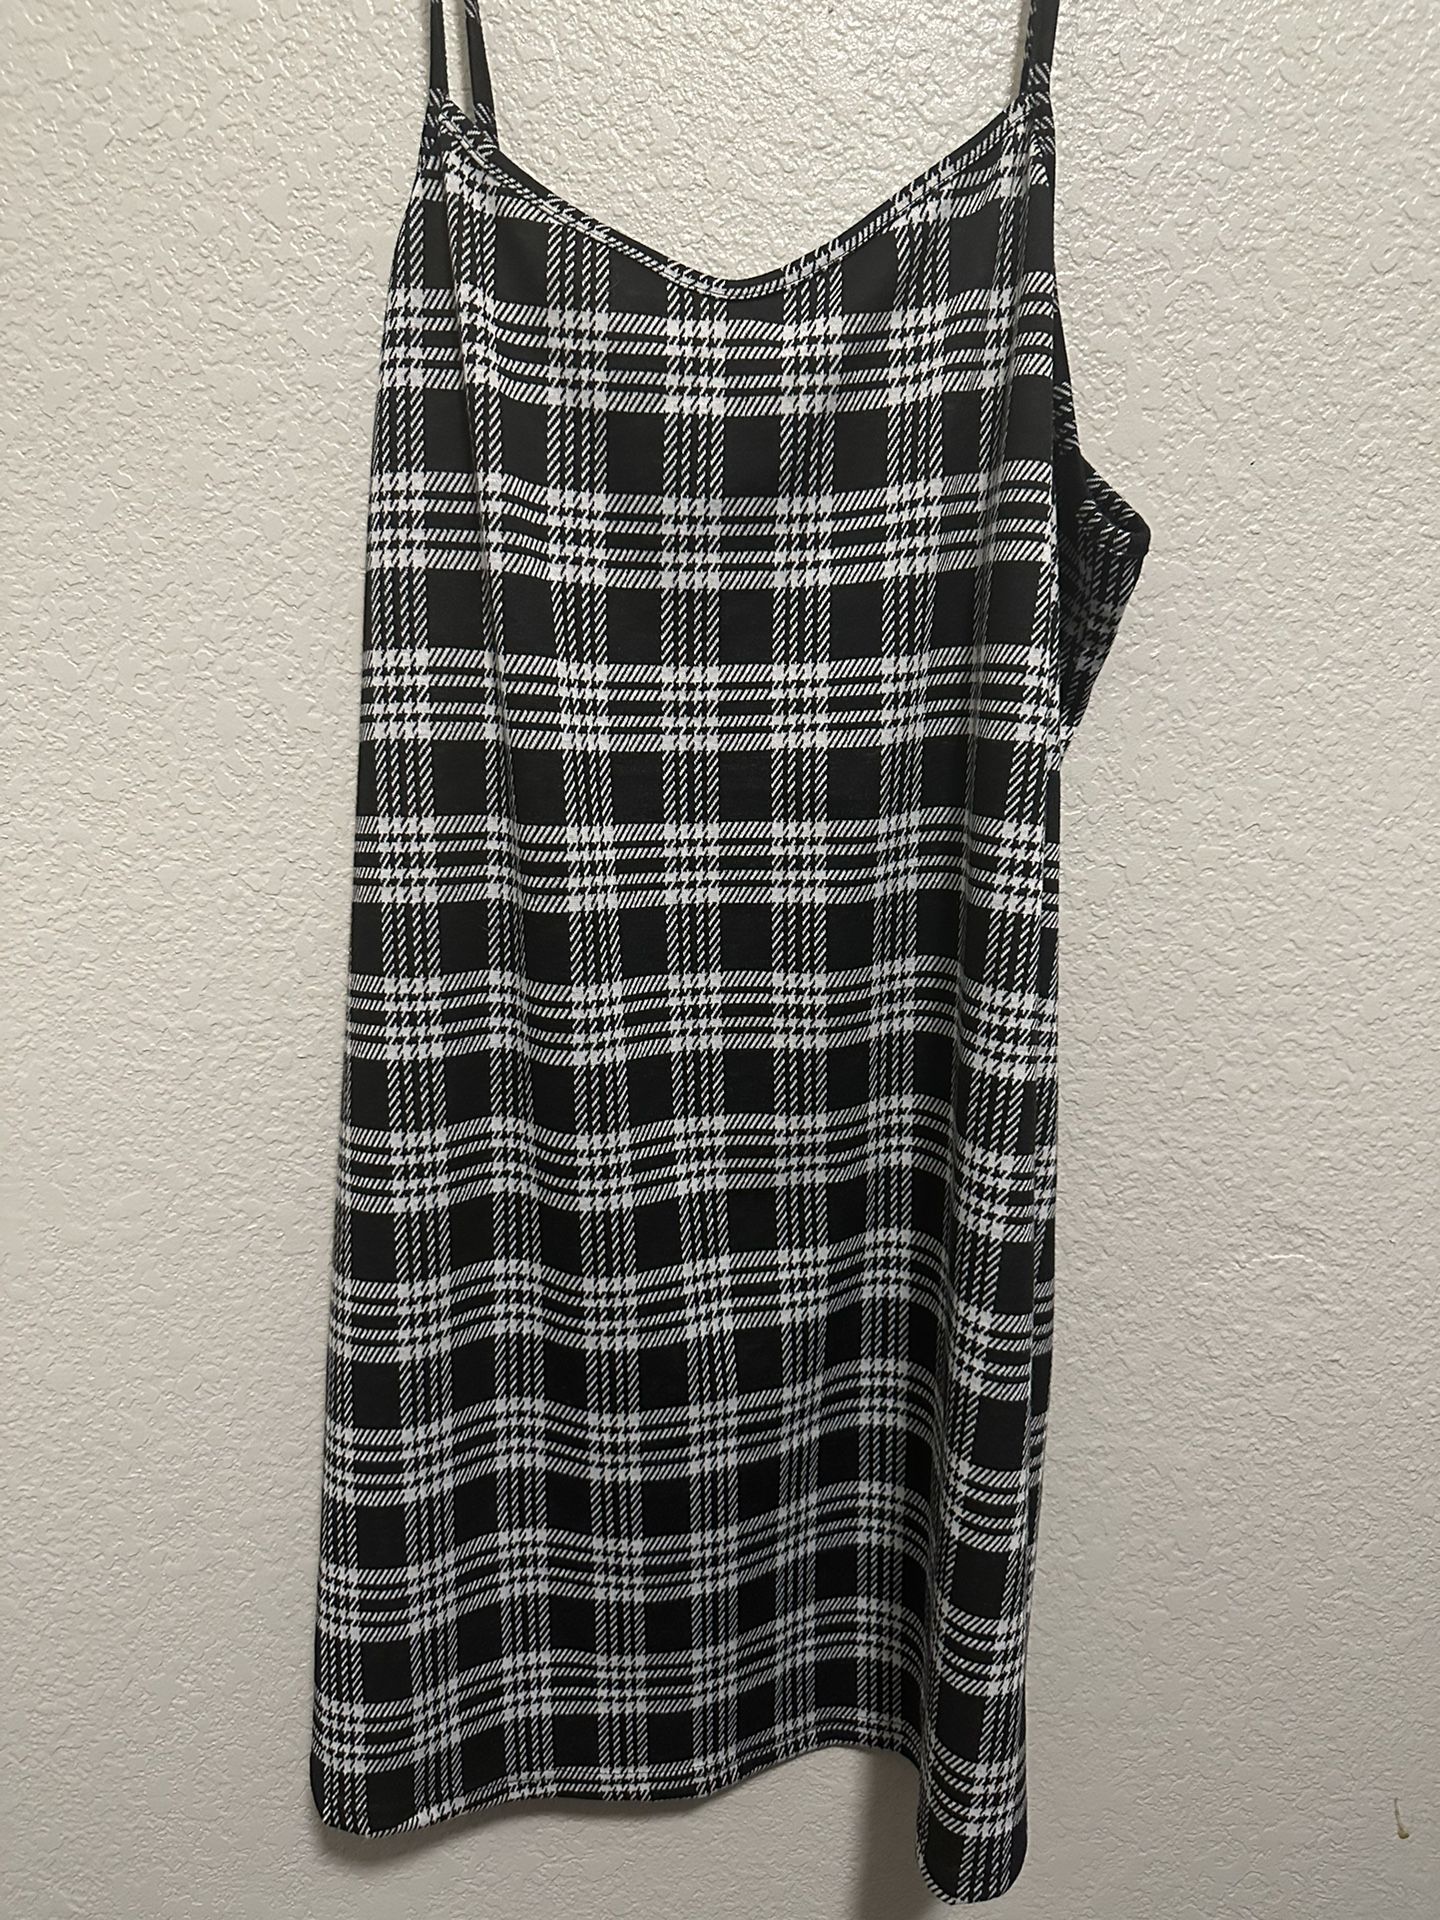 Black and white stripped dress 